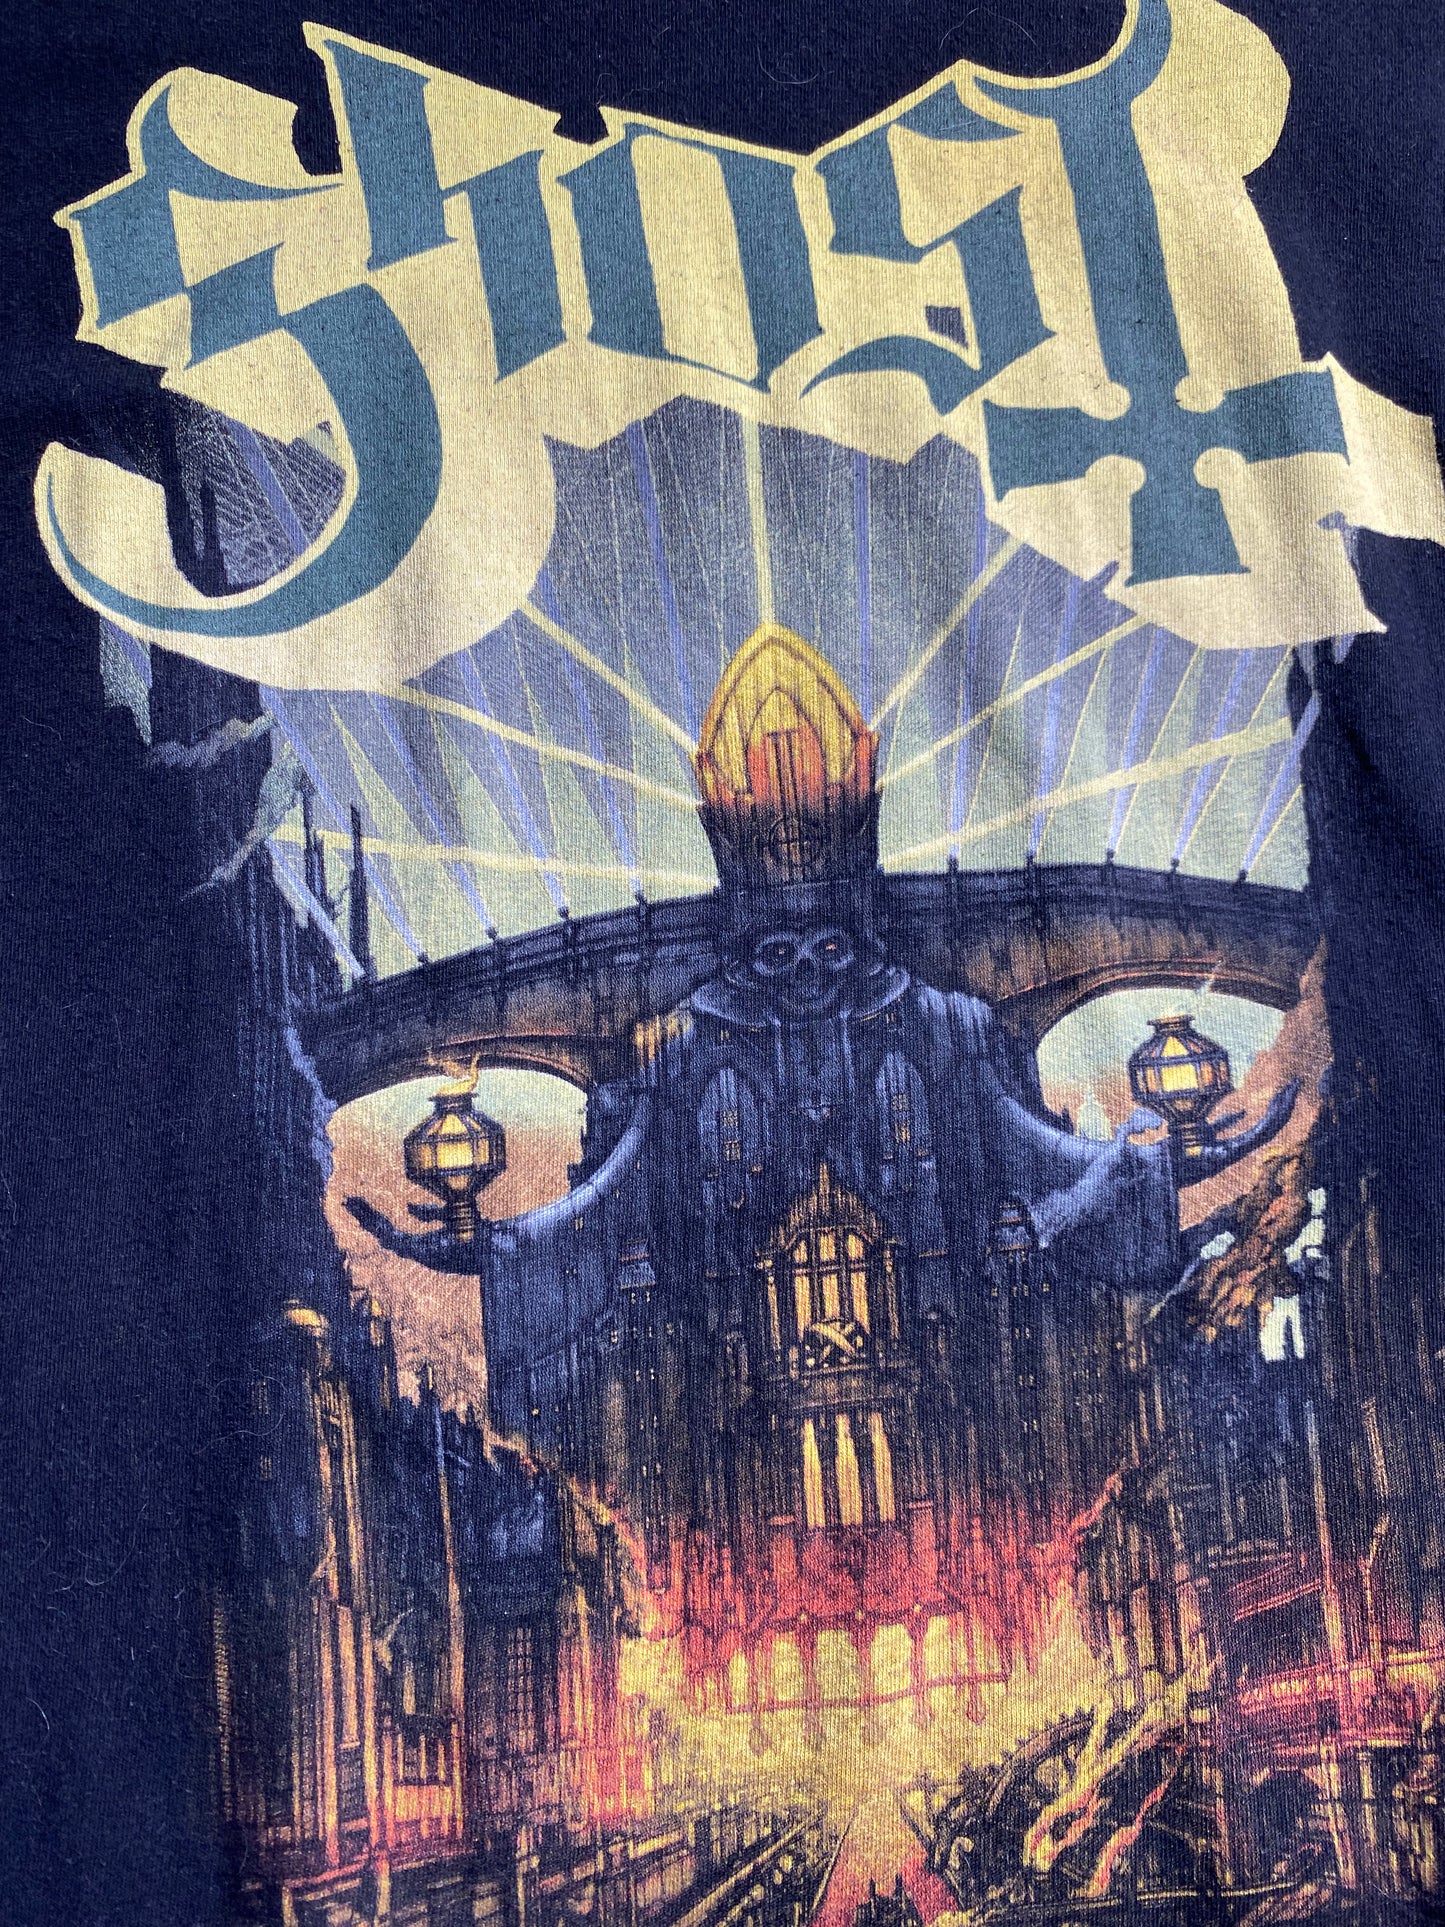 Vintage Ghost T-Shirt